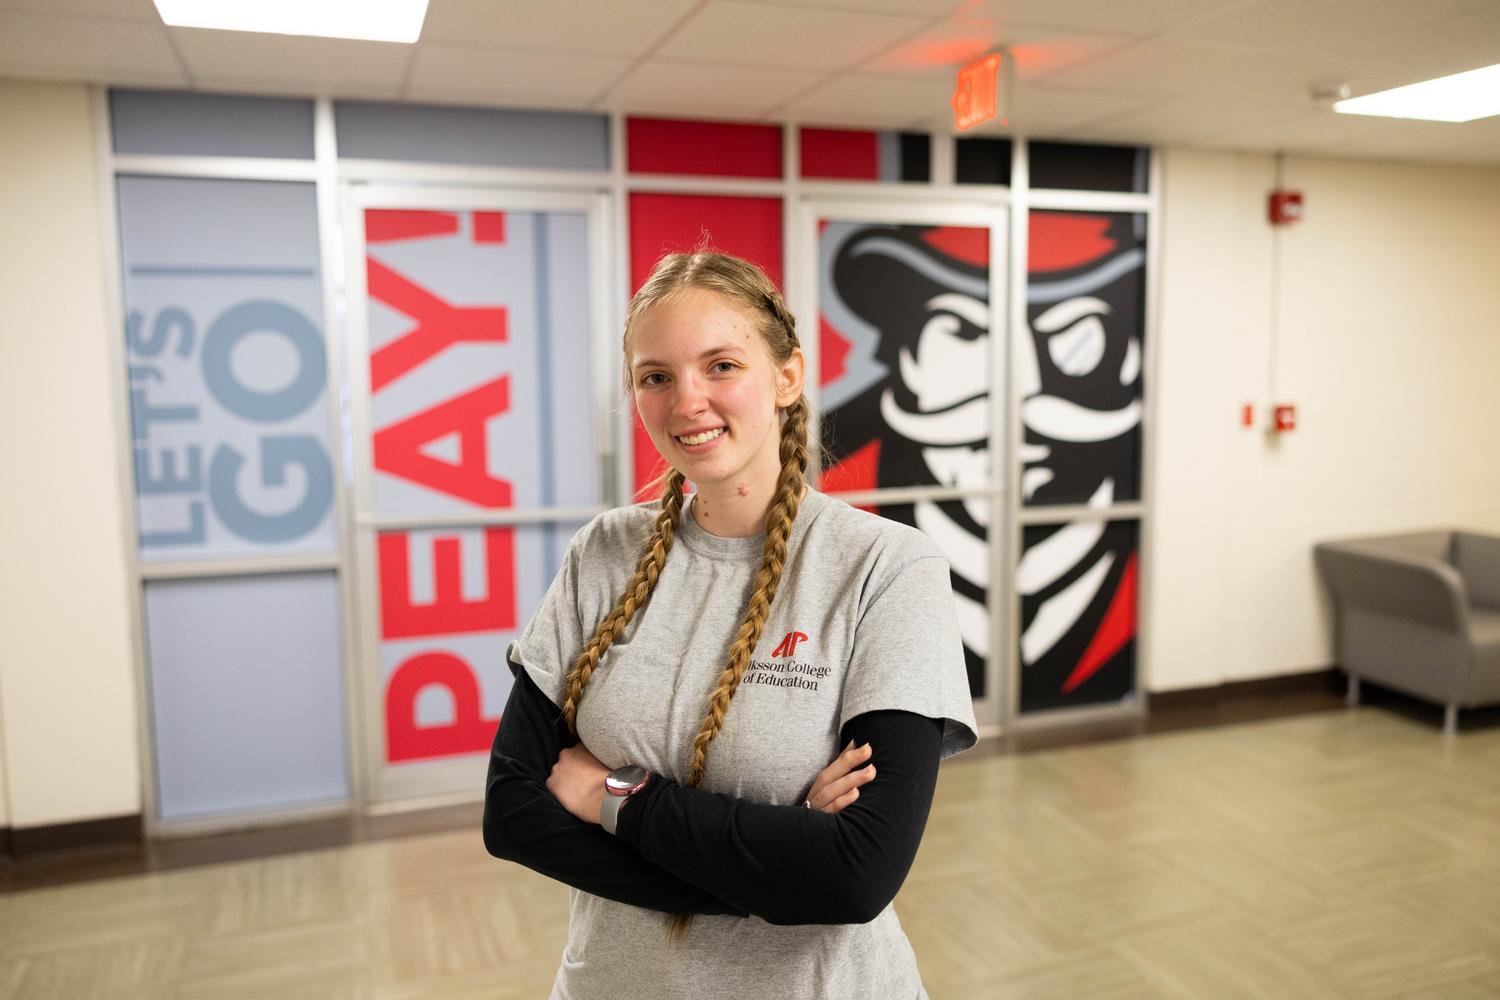 Transfer student Megan Schneck finds purpose, community at Austin Peay